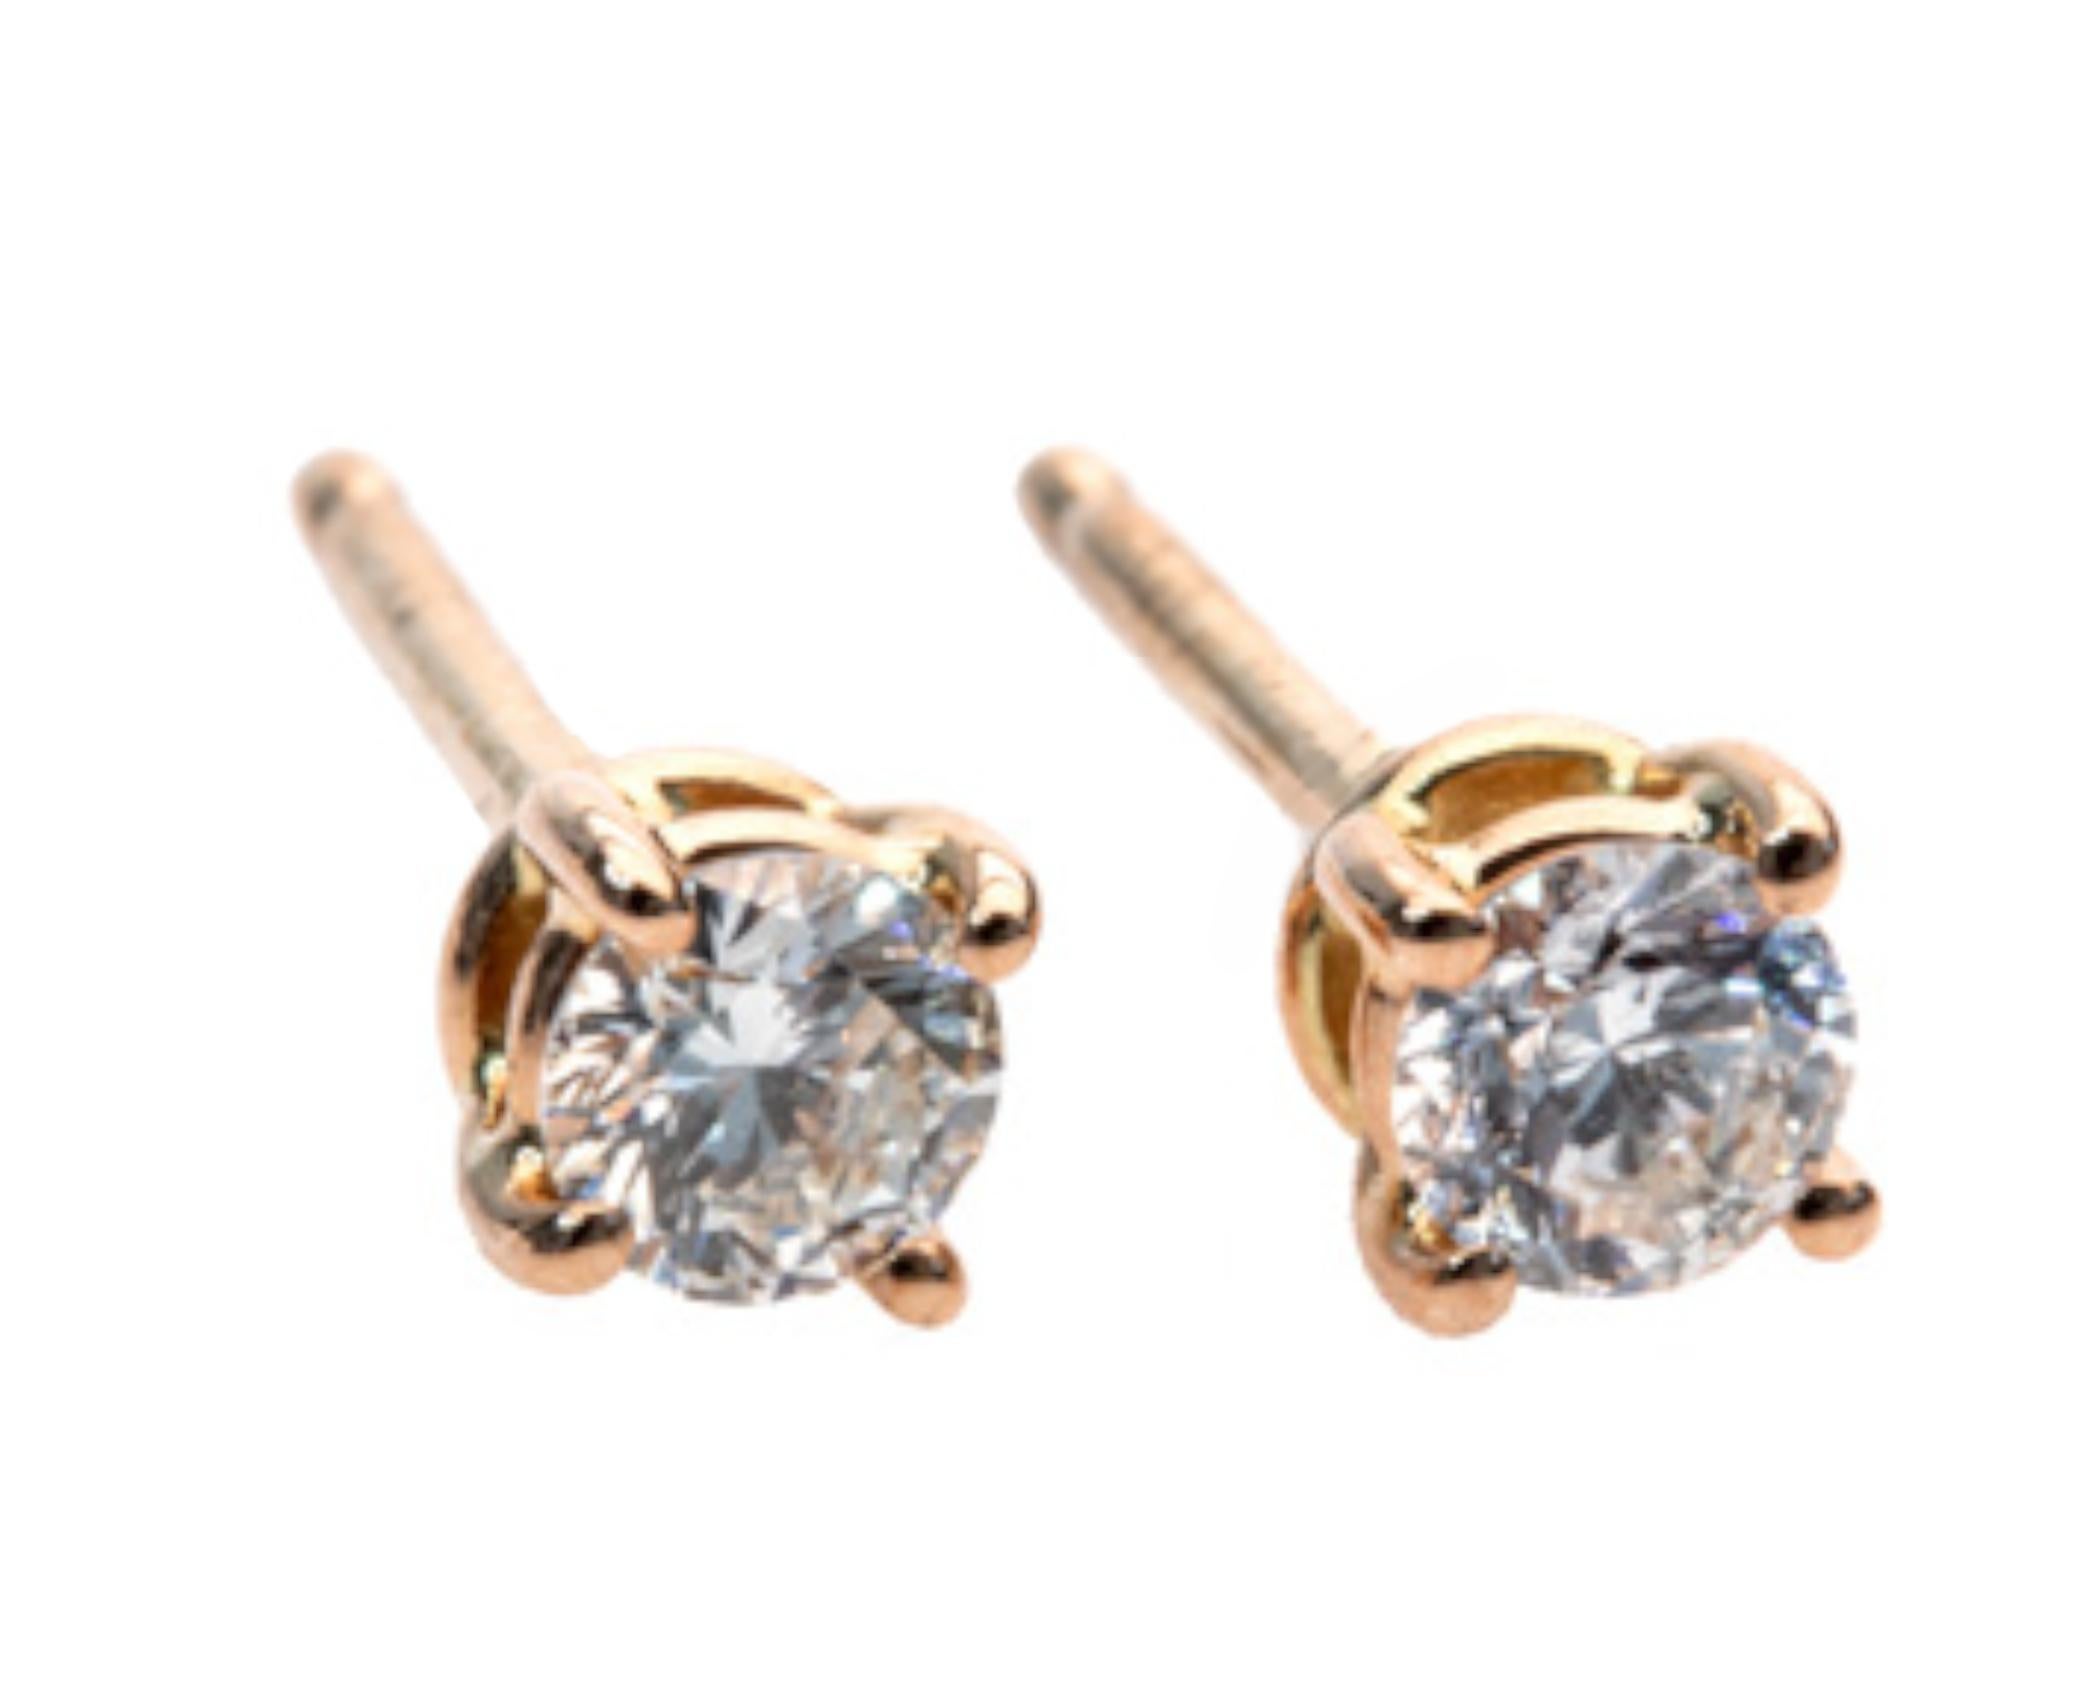 Introducing our exquisite GIA Certified 2 Carat E-F Color VS Round Cut Diamond 18K Gold Stud Earrings, expertly crafted in Italy. These stunning earrings are the epitome of elegance and luxury, offering a timeless and classic design that will